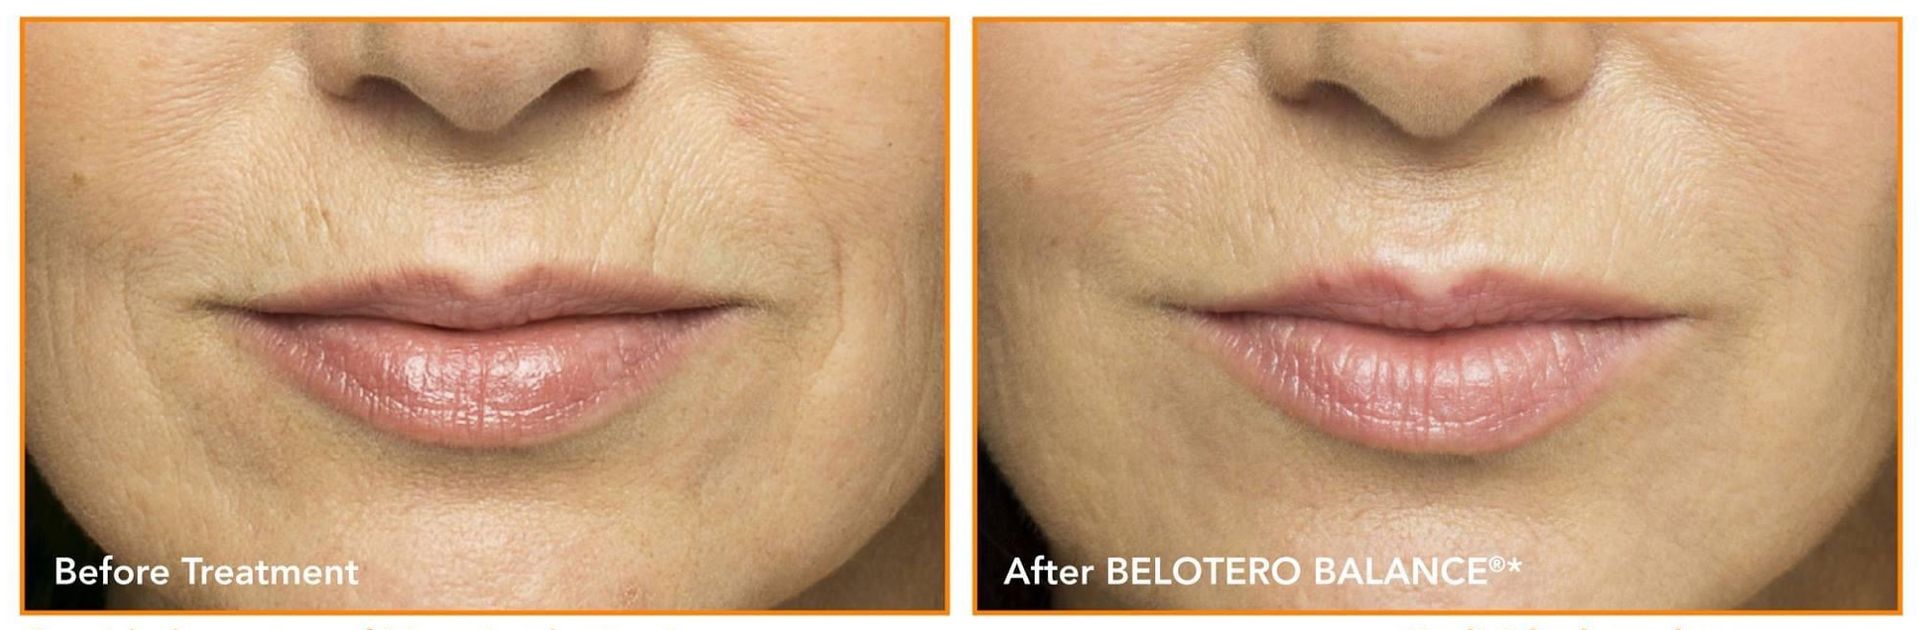 Before and After Belotero Treatment